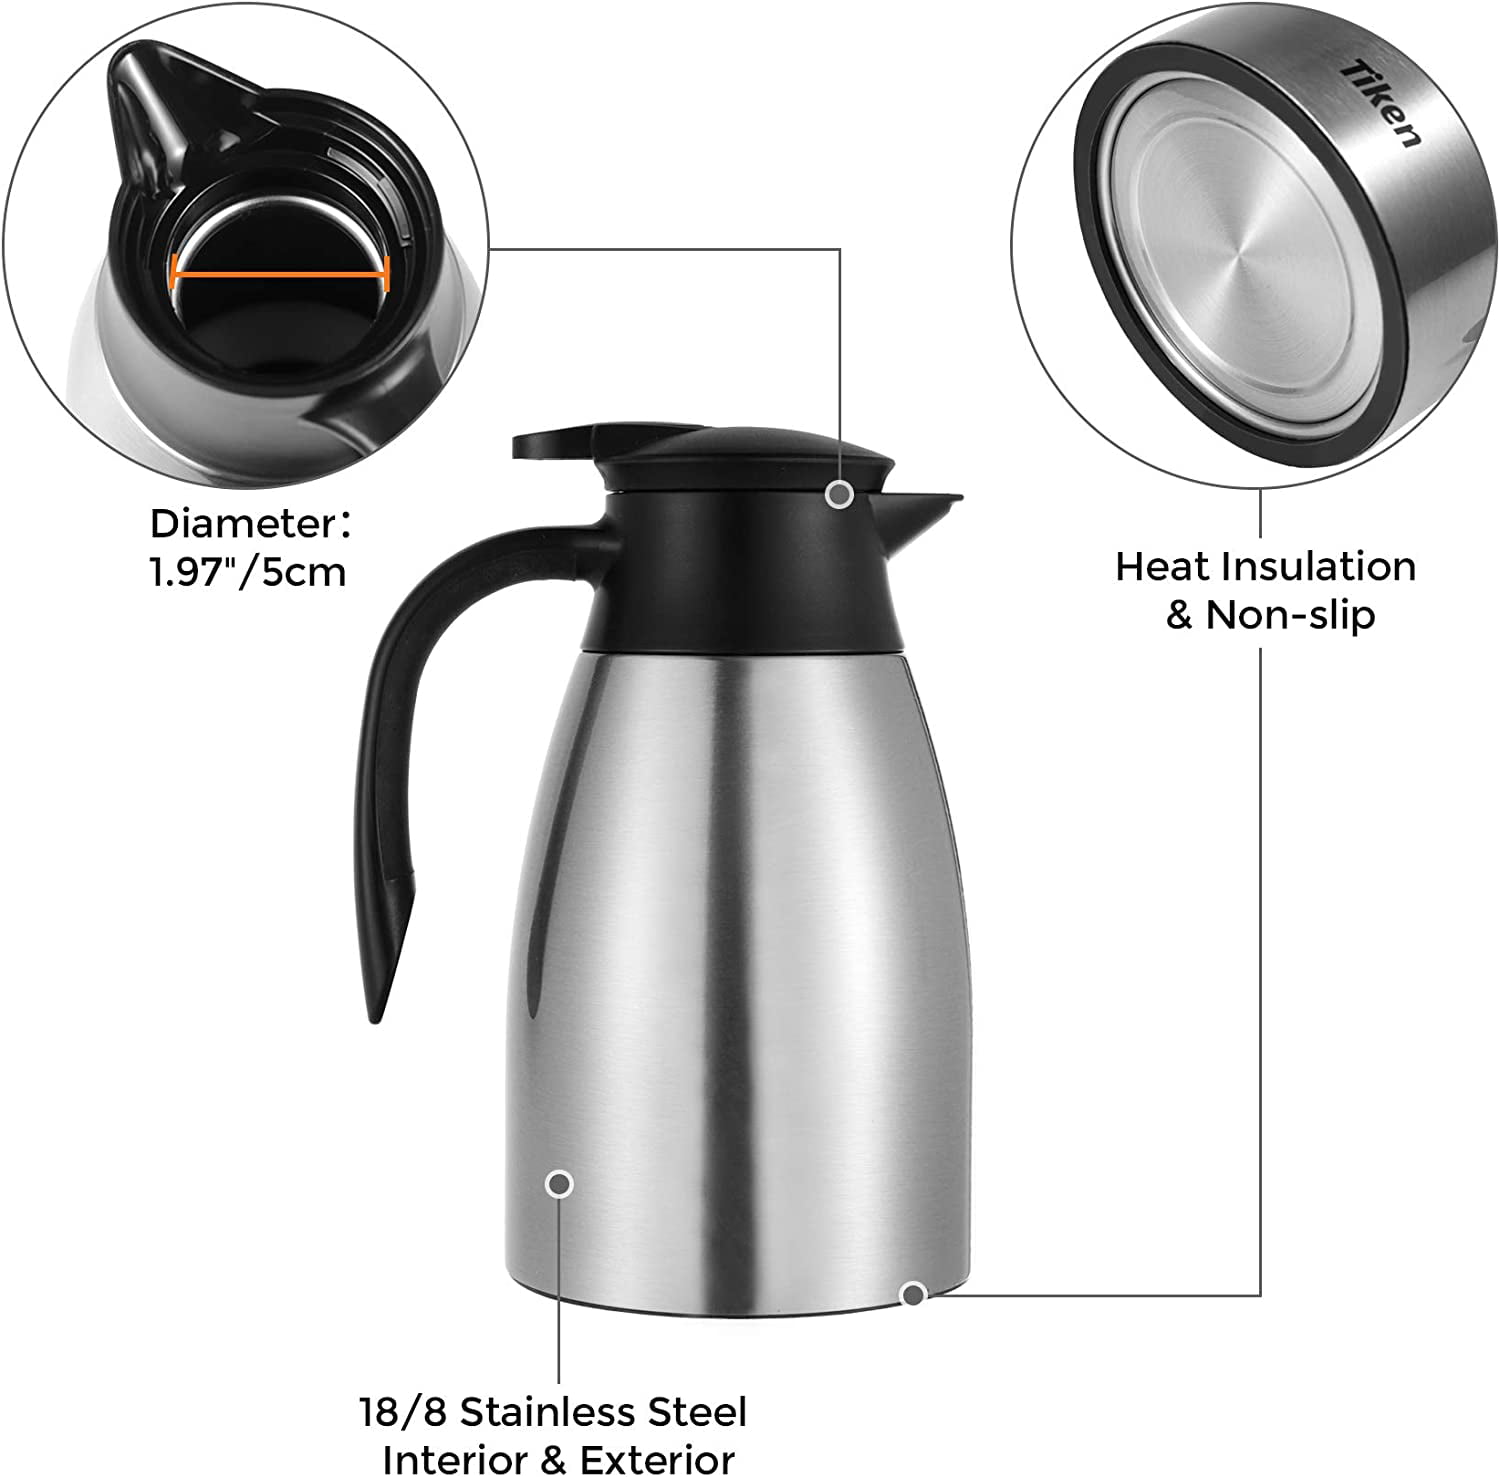 Thermal Coffee Carafe Dispenser 51 Oz/ 1.5 L - Double Wall Vacuum